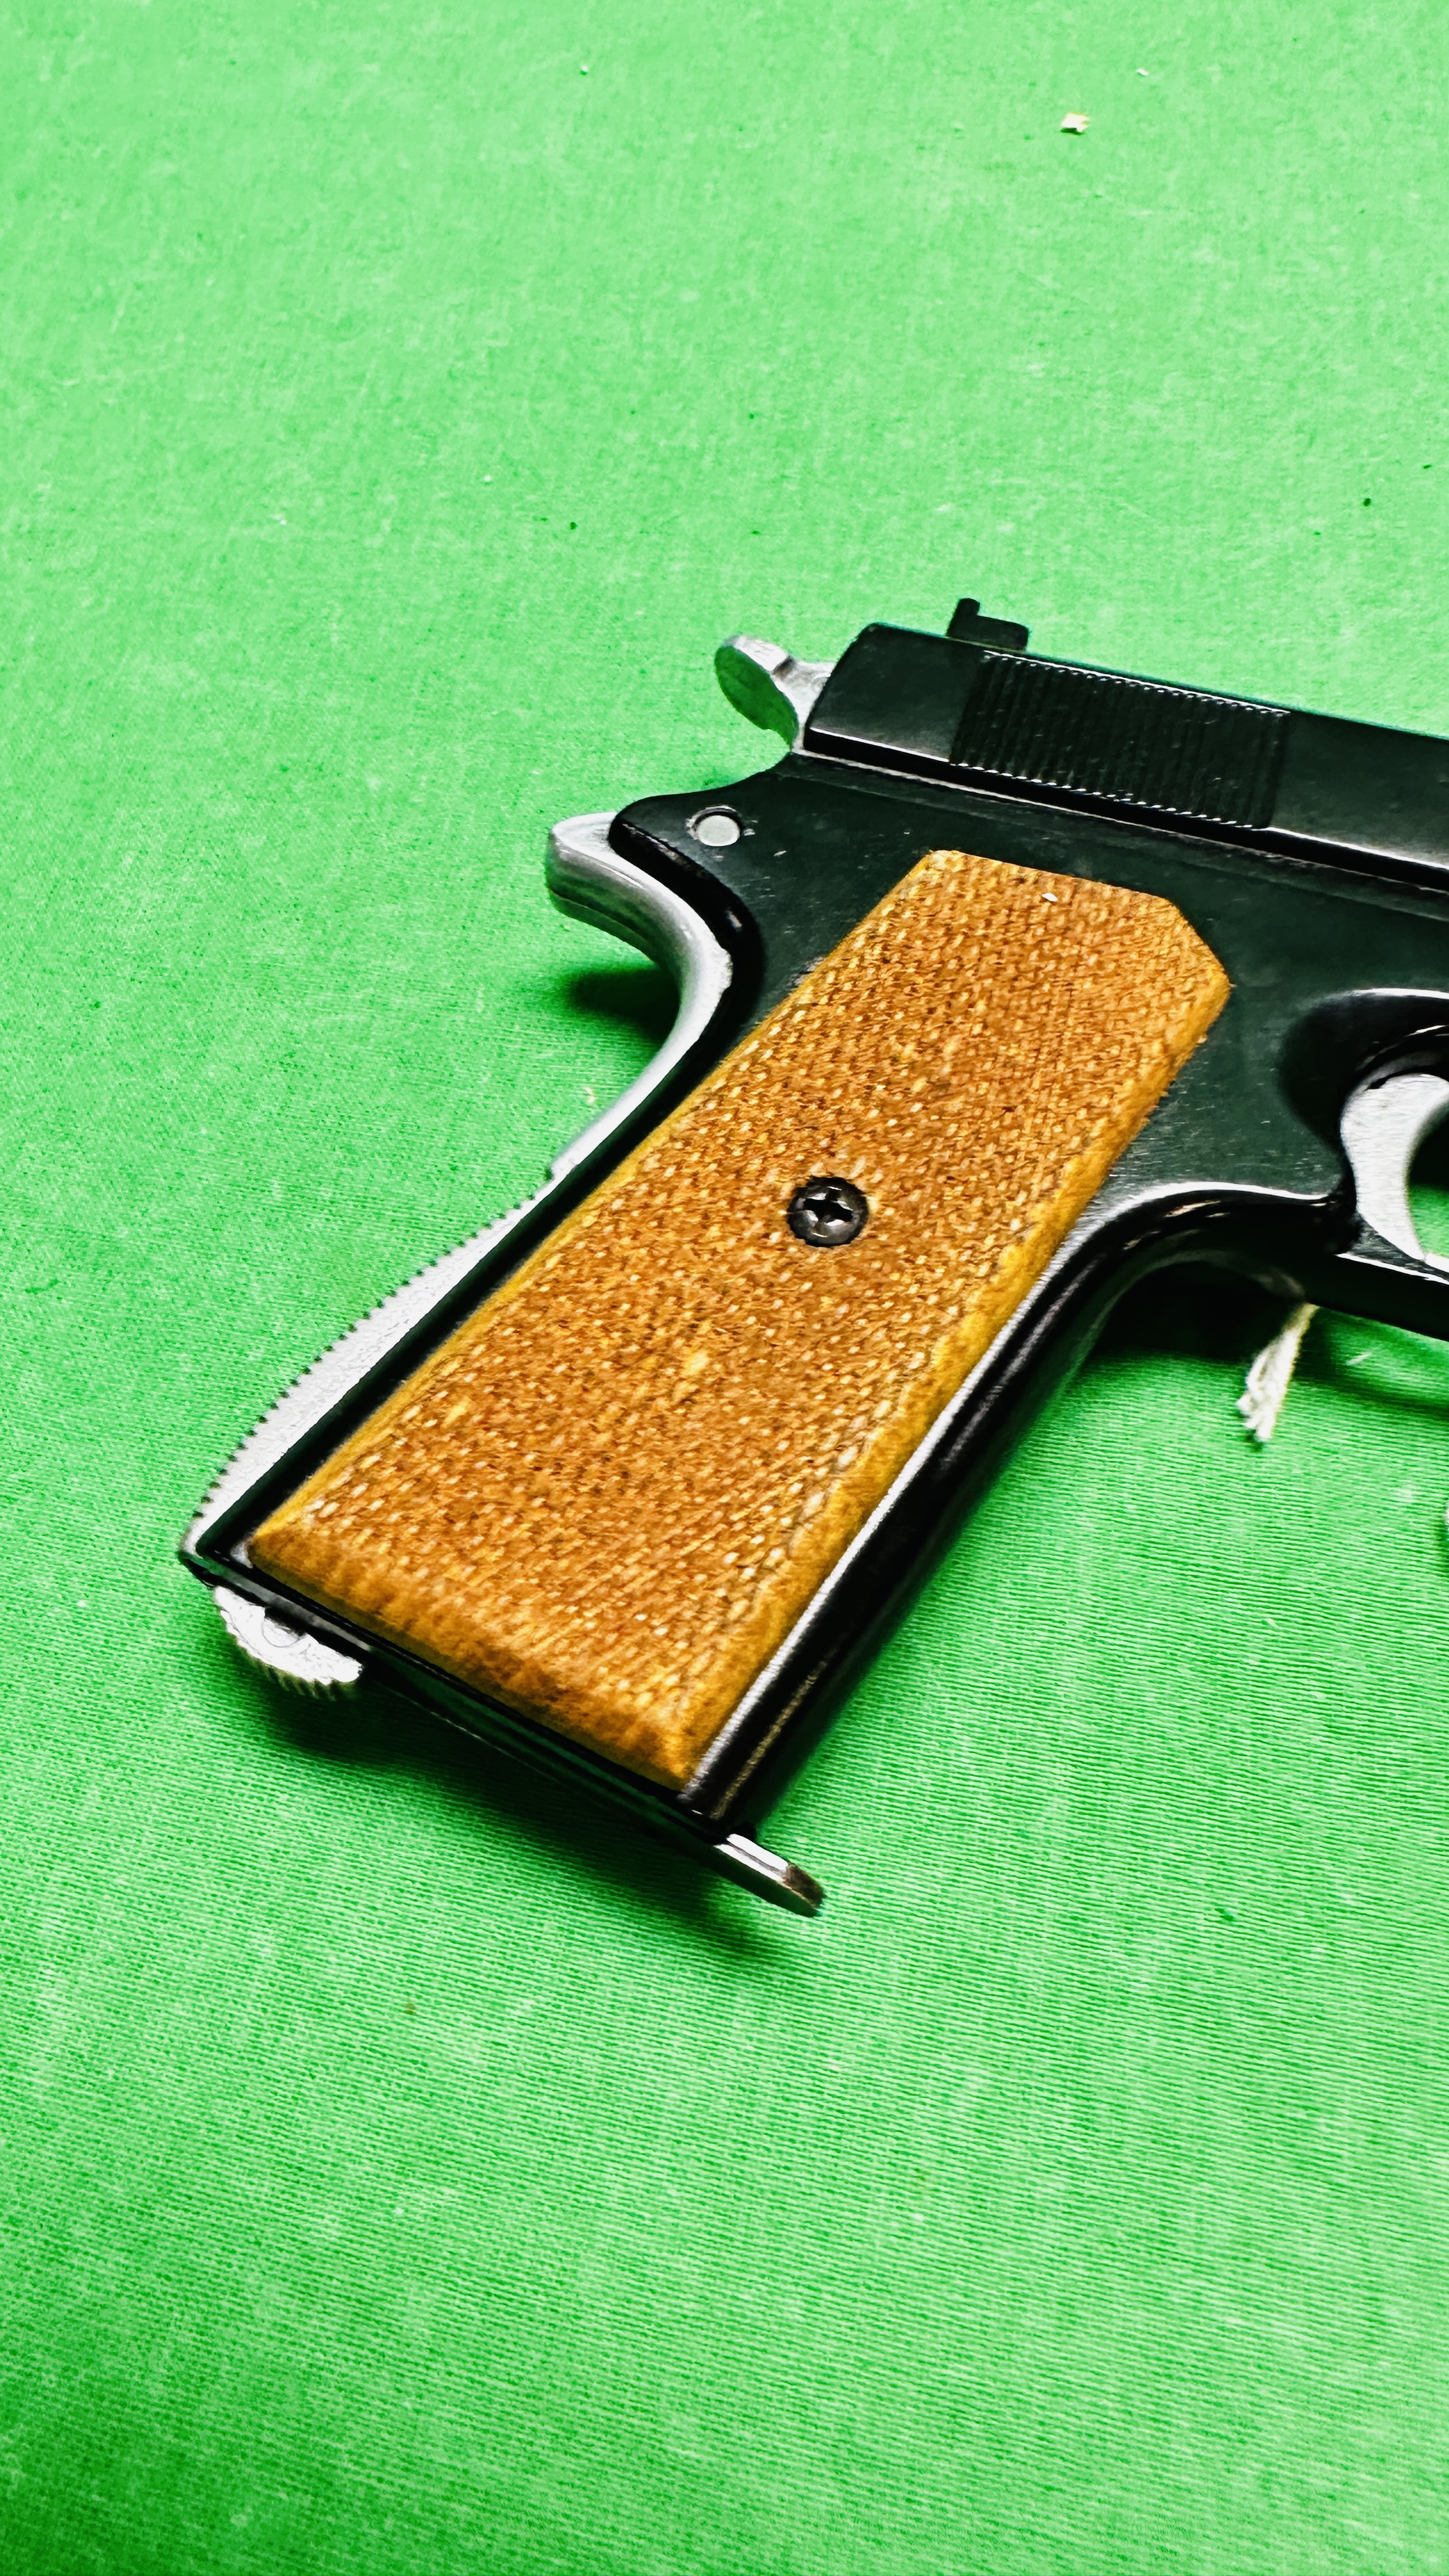 BRUNI AUTOMATIC 8MM CALIBRE BLANK FIRING PISTOL (COLT 1911 REPLICA) - (ALL GUNS TO INSPECTED AND - Image 7 of 8